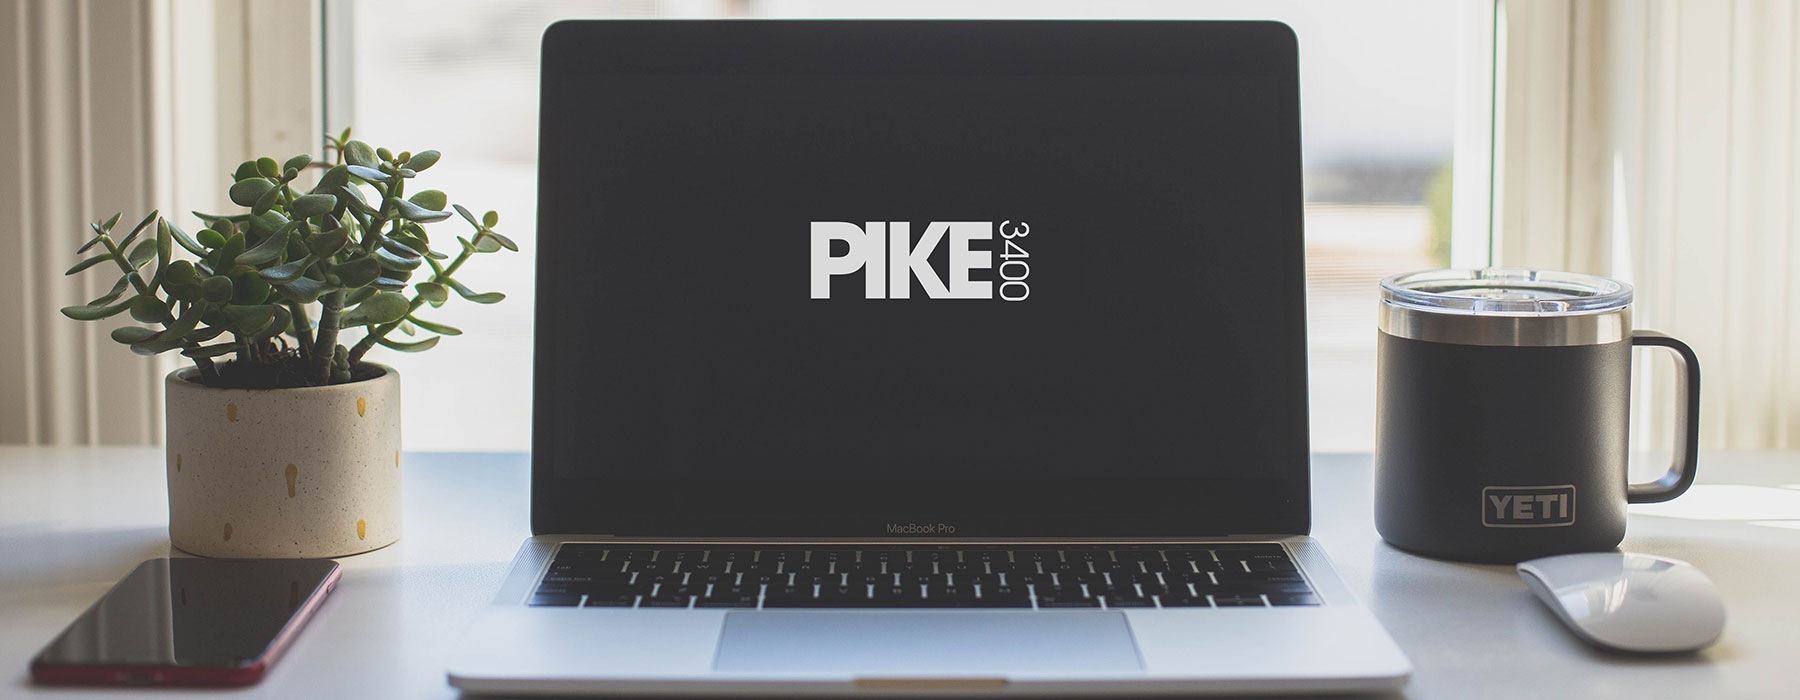 lifestyle image of a laptop displaying the Pike 3400 logo